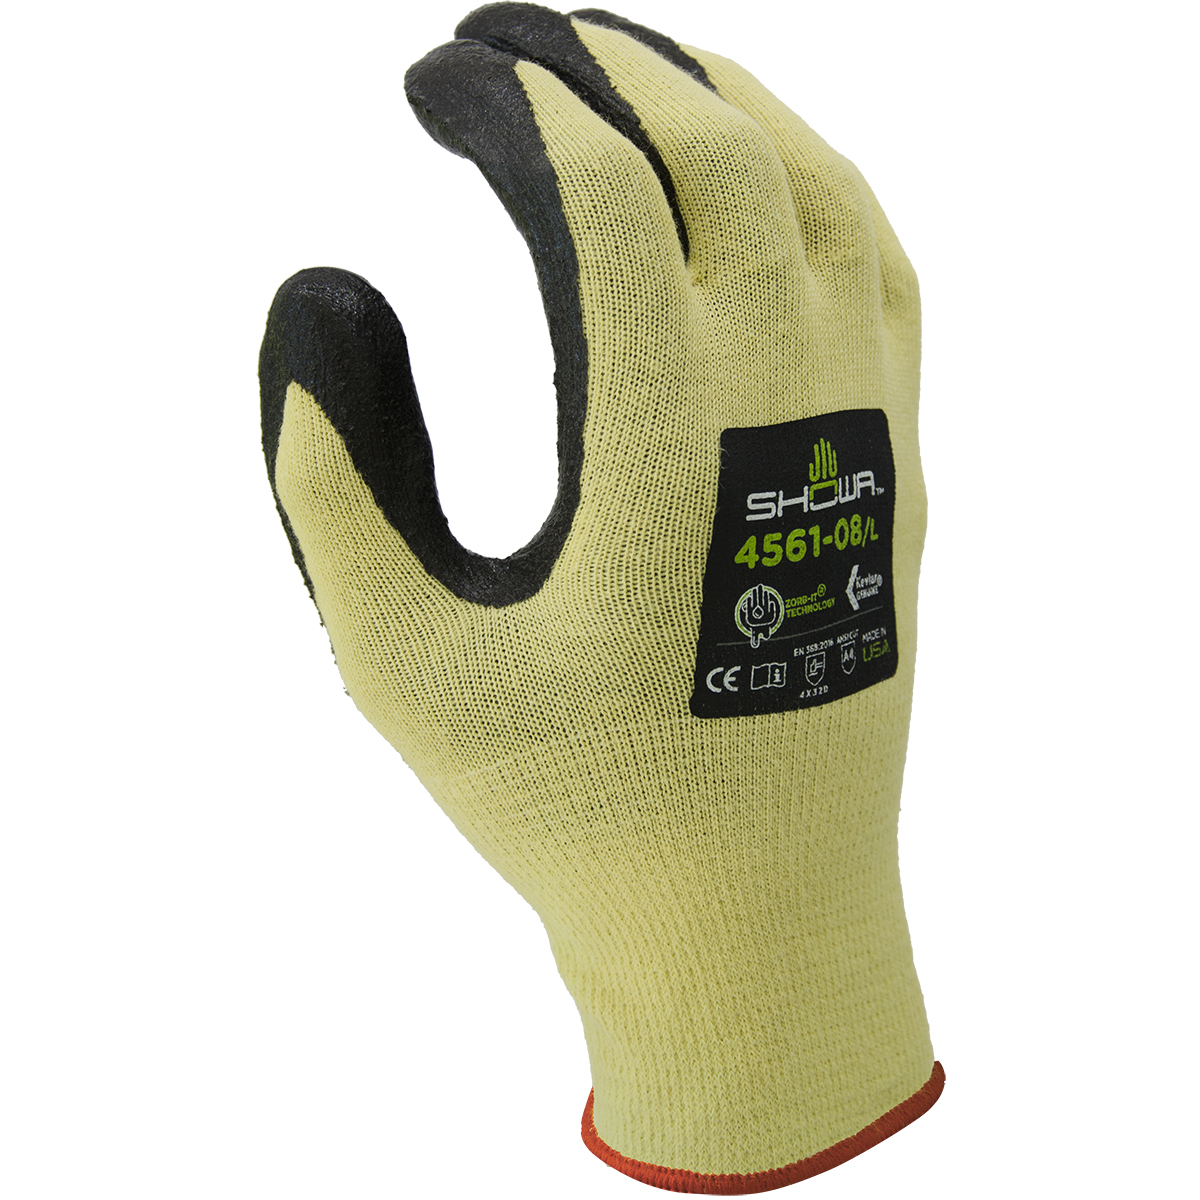 Cut resistant, sponge nitrile palm w/Zorb-IT technology, 15 gauge seamless knit made Kevlar®, yellow w/black dip,  ANSI CUT LEVEL A4/extra extra large